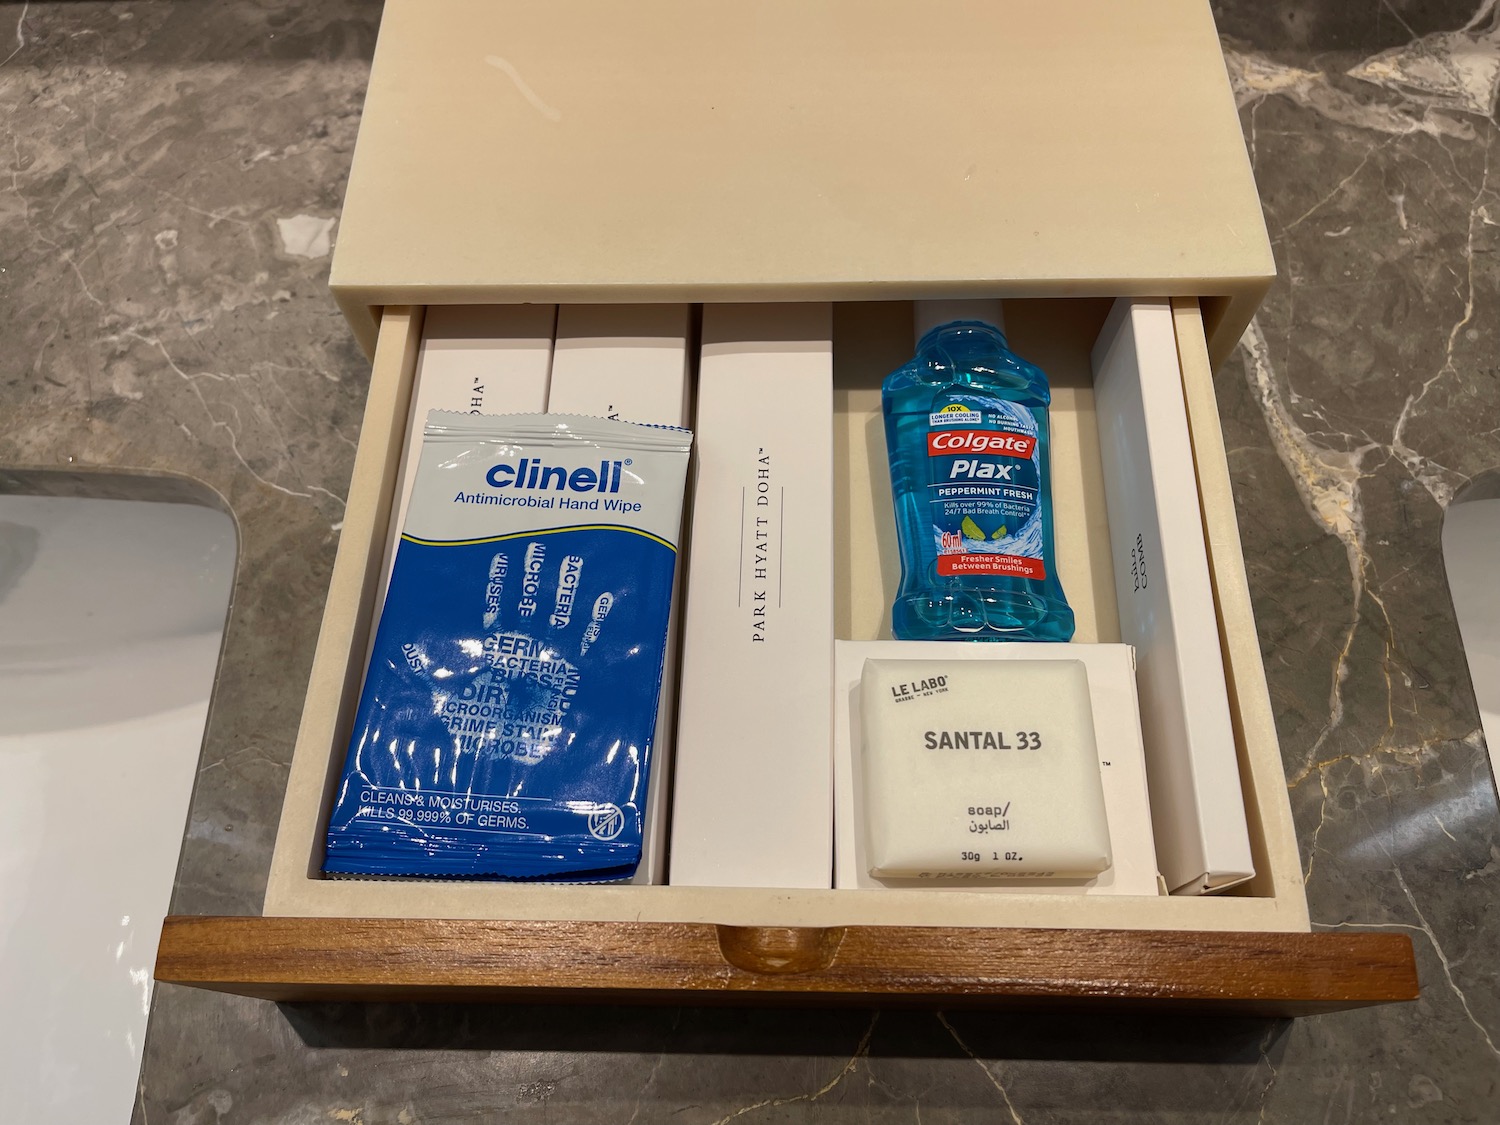 a box with a bottle and a soap in it